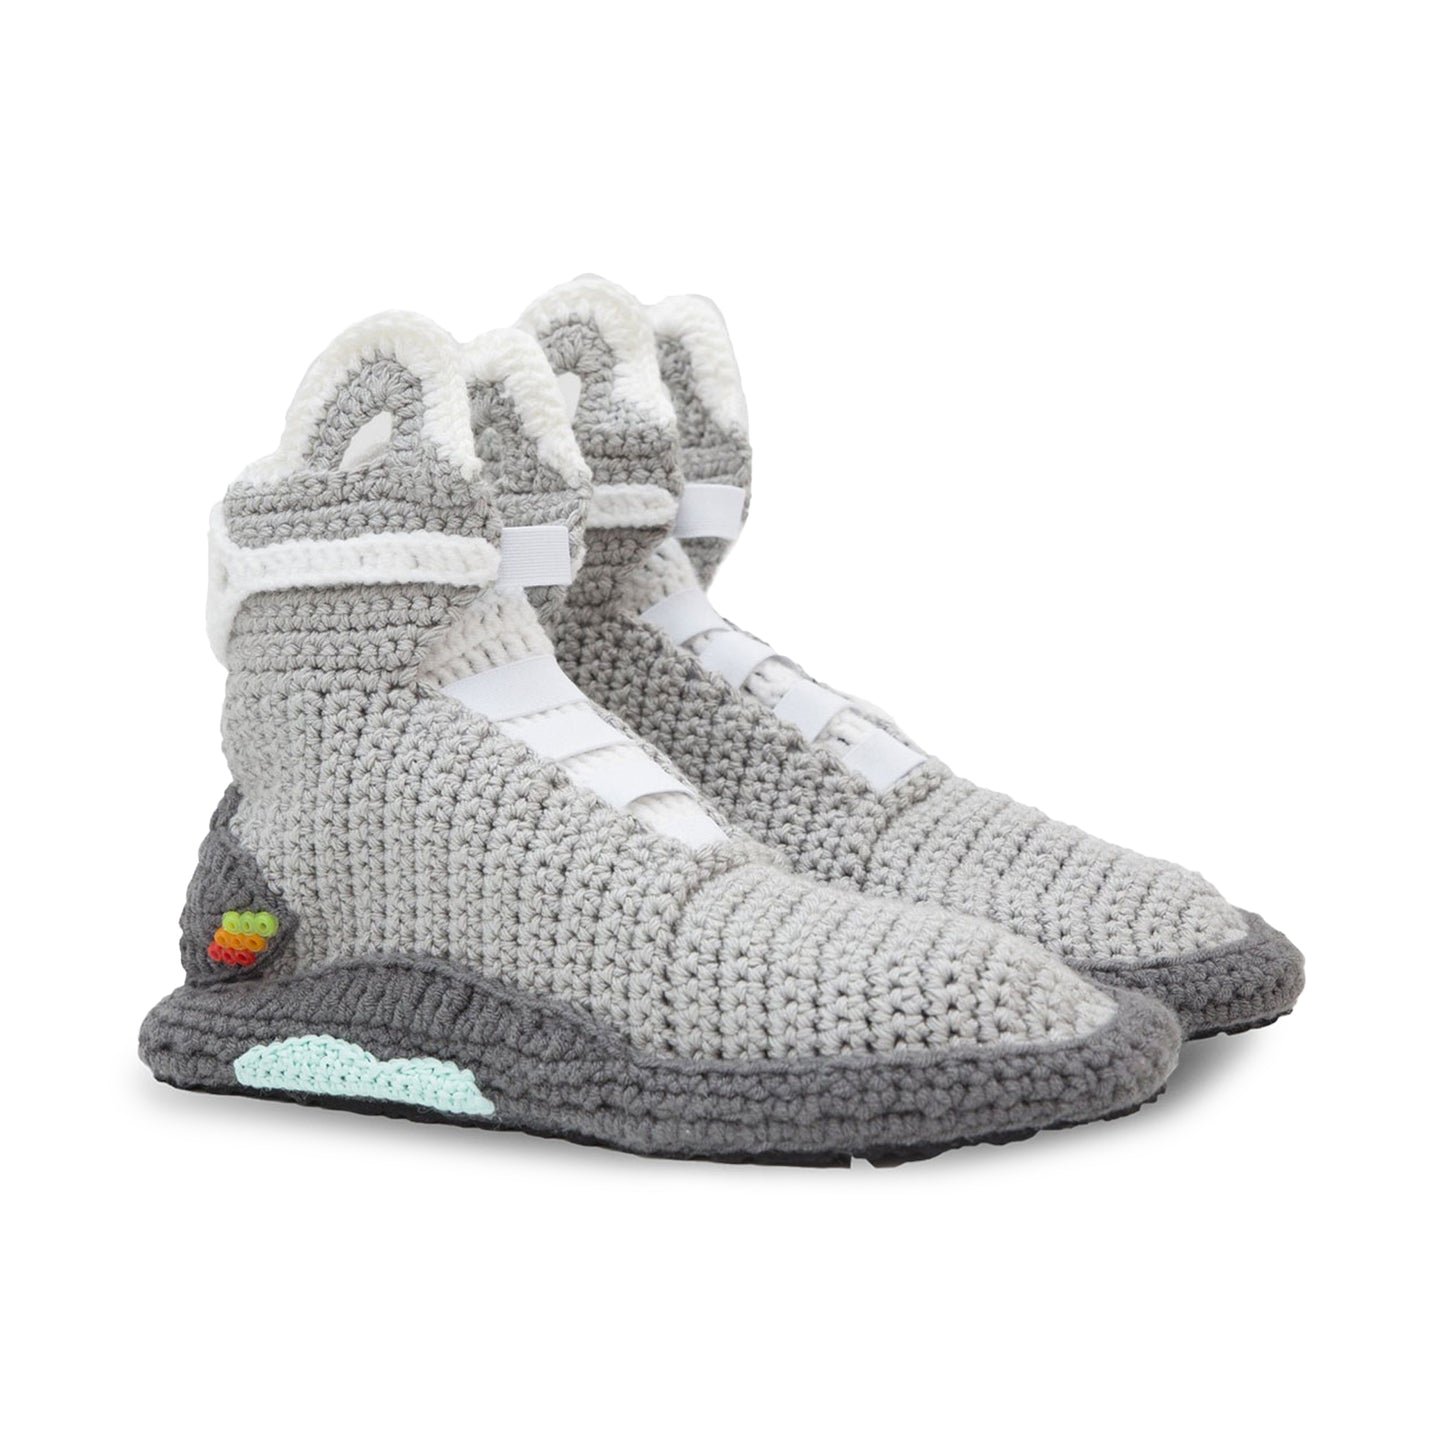 Fuggit BTTF Knit House Shoes